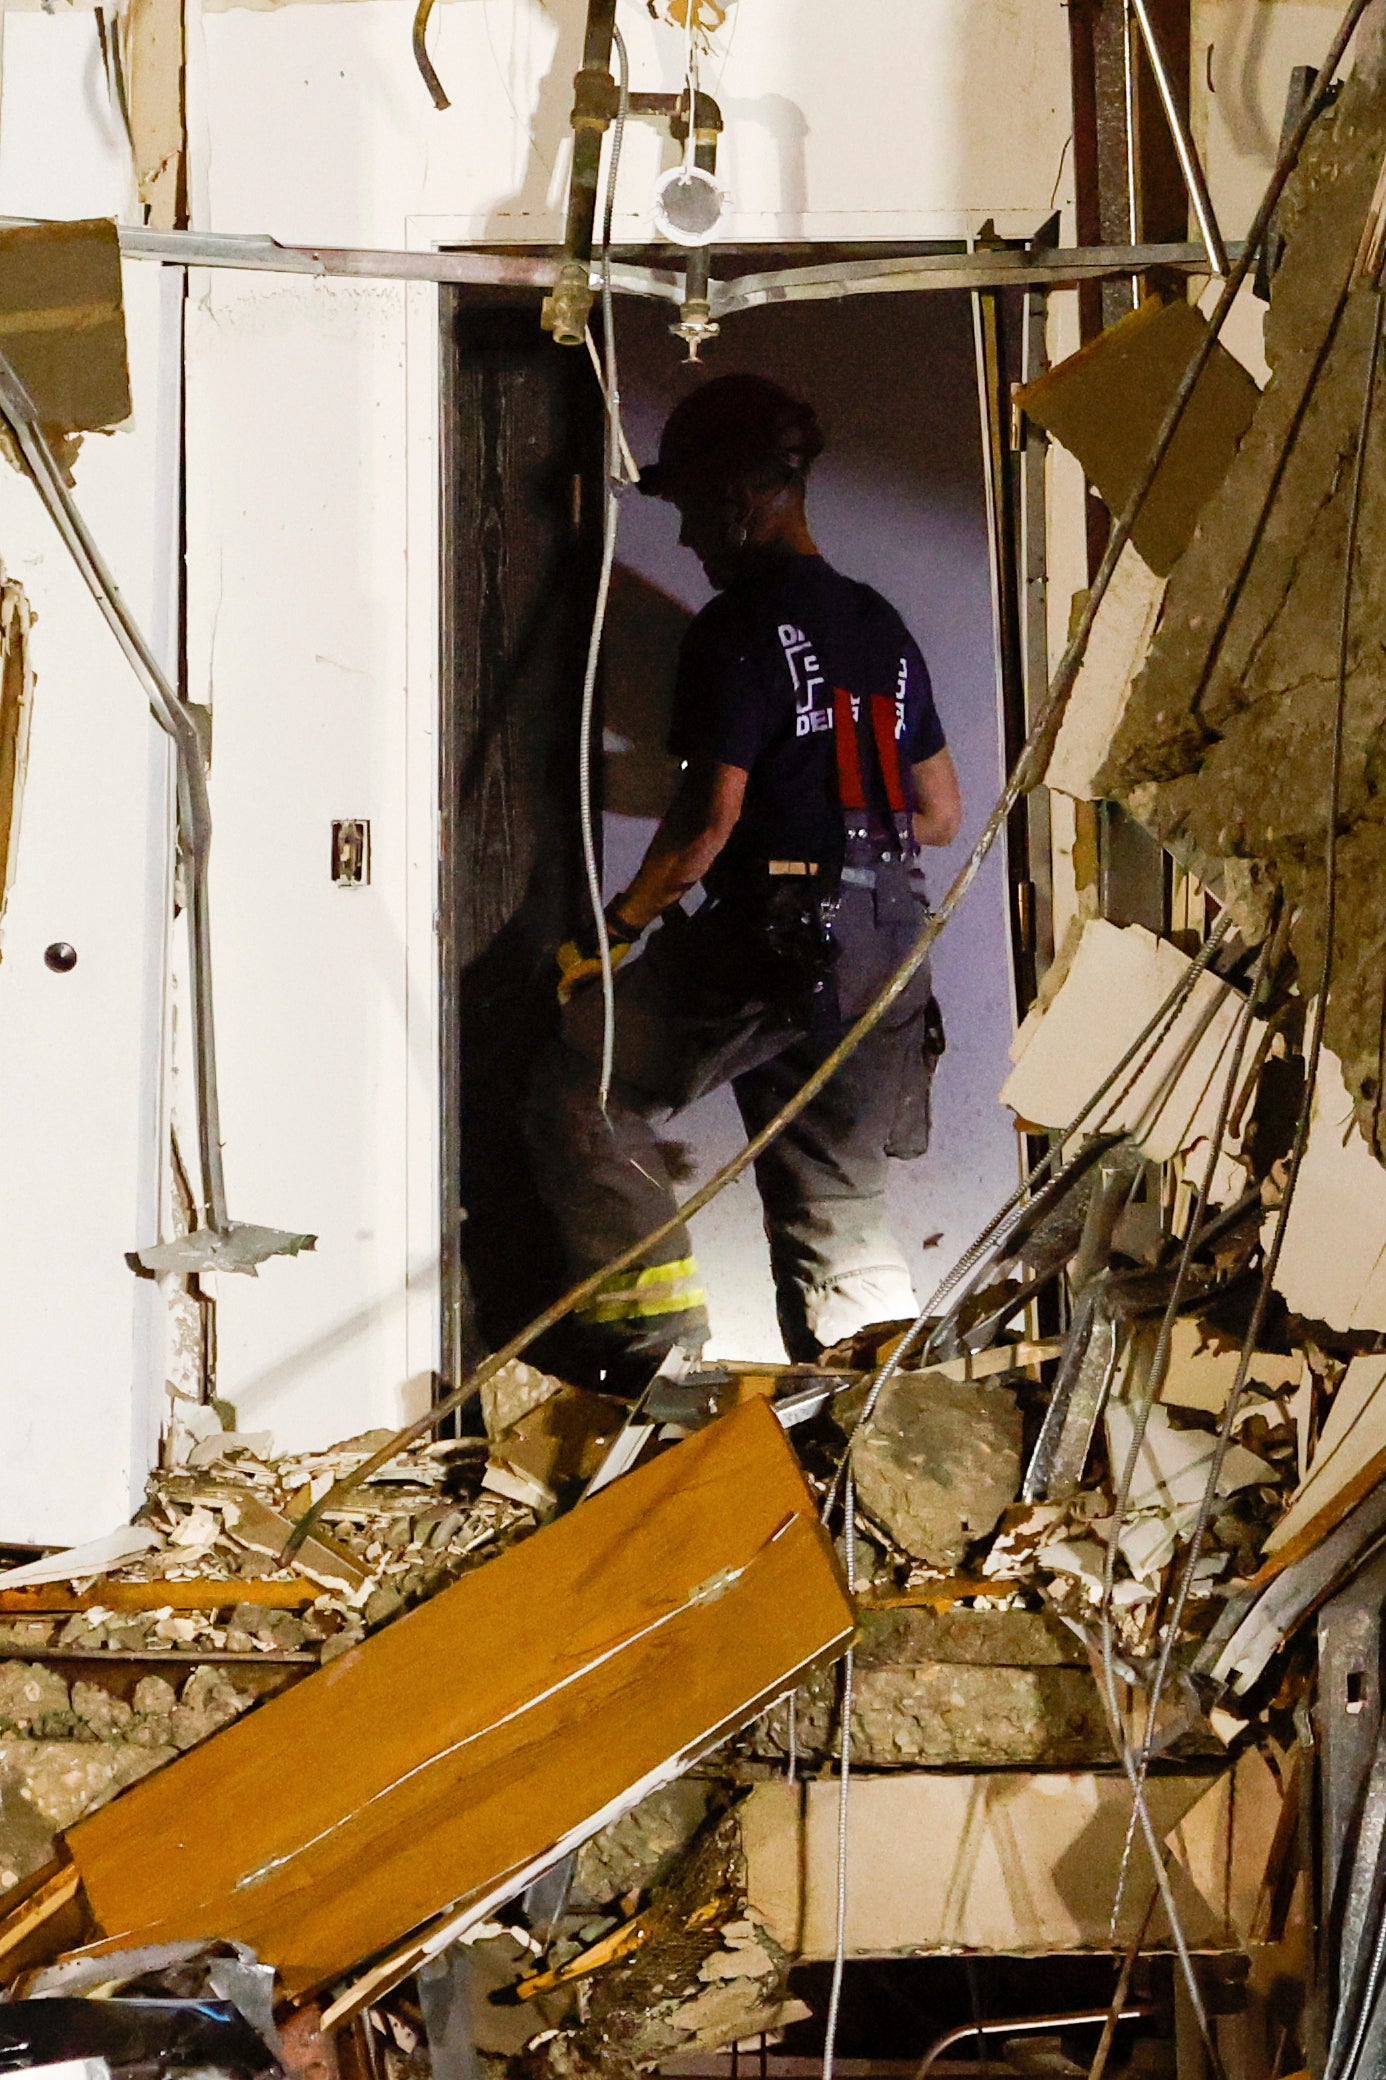 A firefighter combs through the wreckage while searching for residents potentially trapped after the collapse